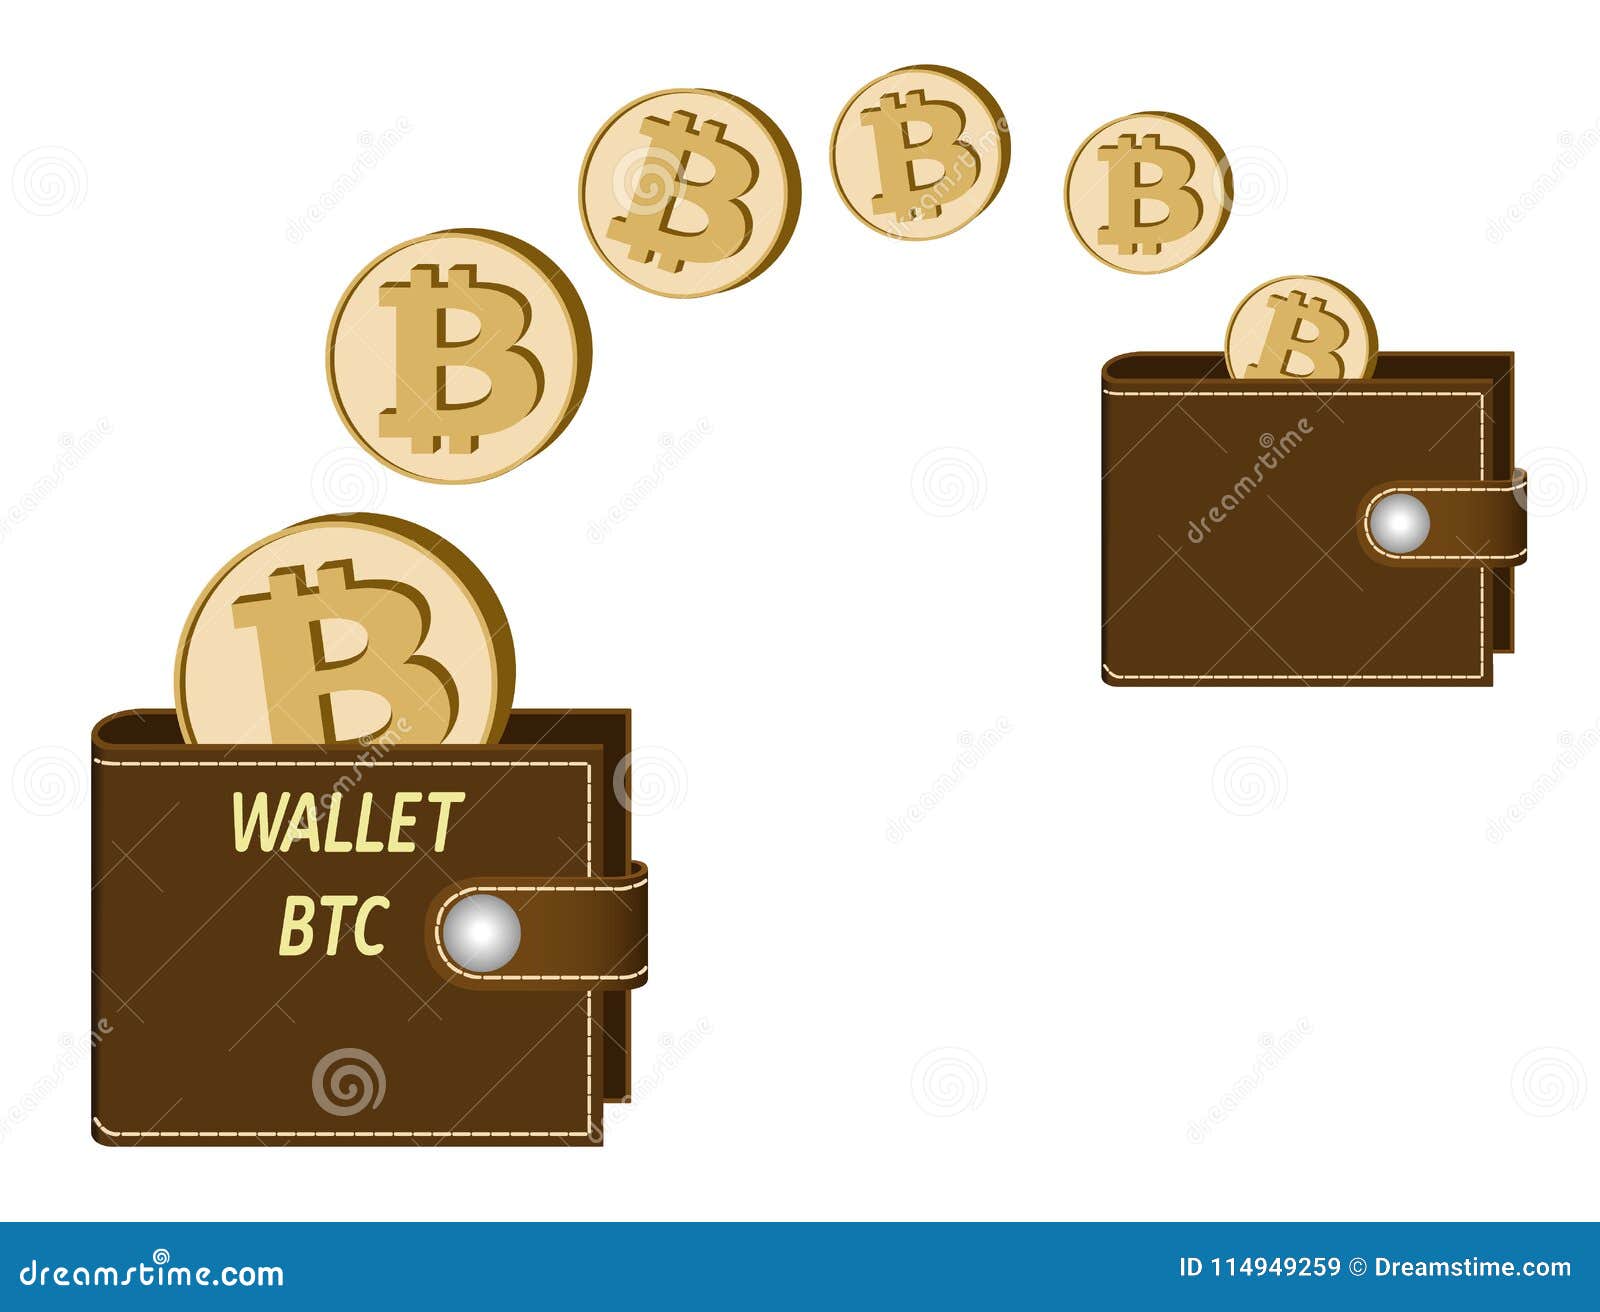 transfer bitcoins to another wallet